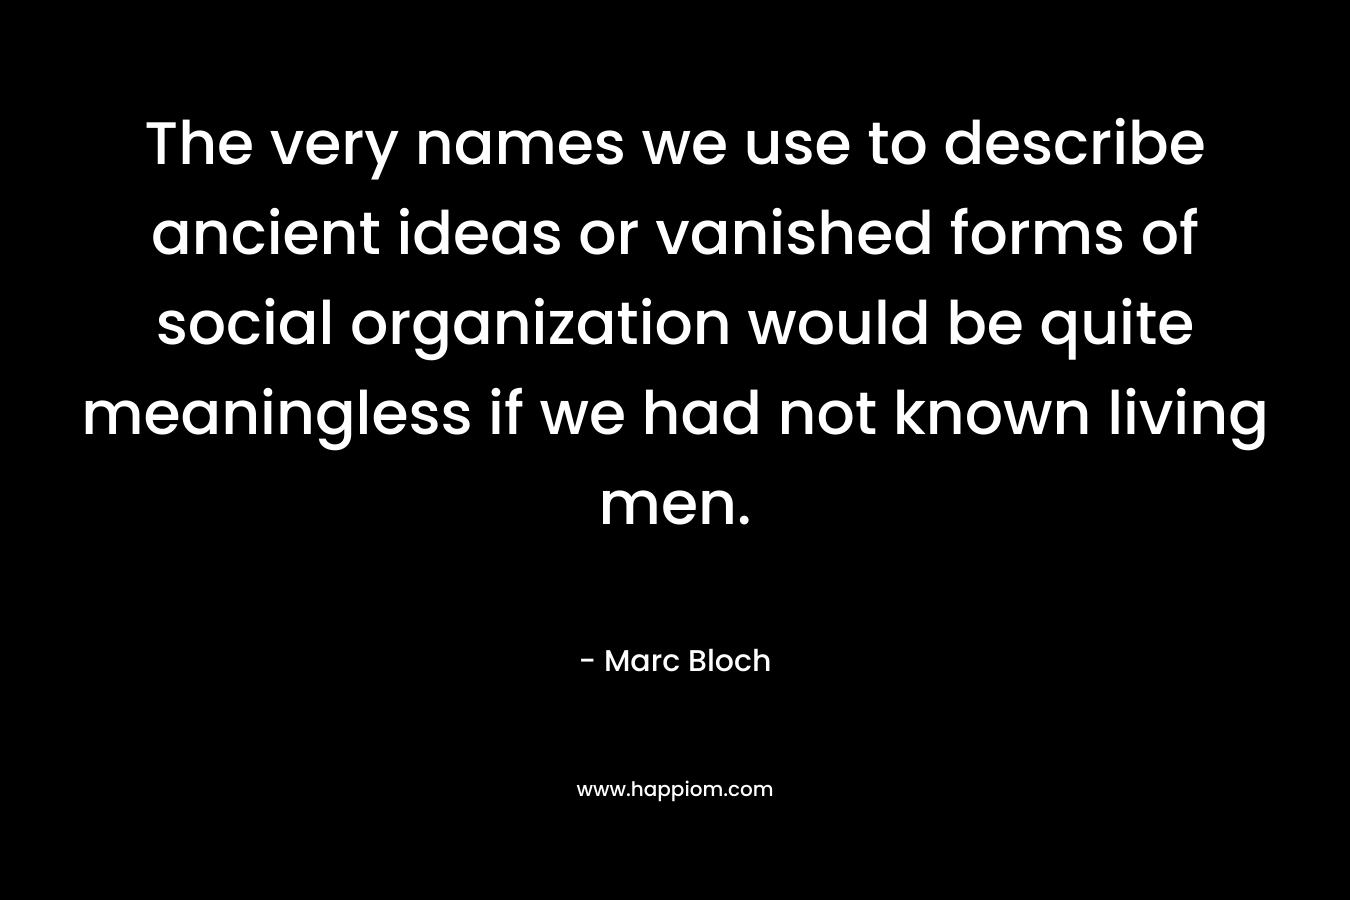 The very names we use to describe ancient ideas or vanished forms of social organization would be quite meaningless if we had not known living men. – Marc Bloch